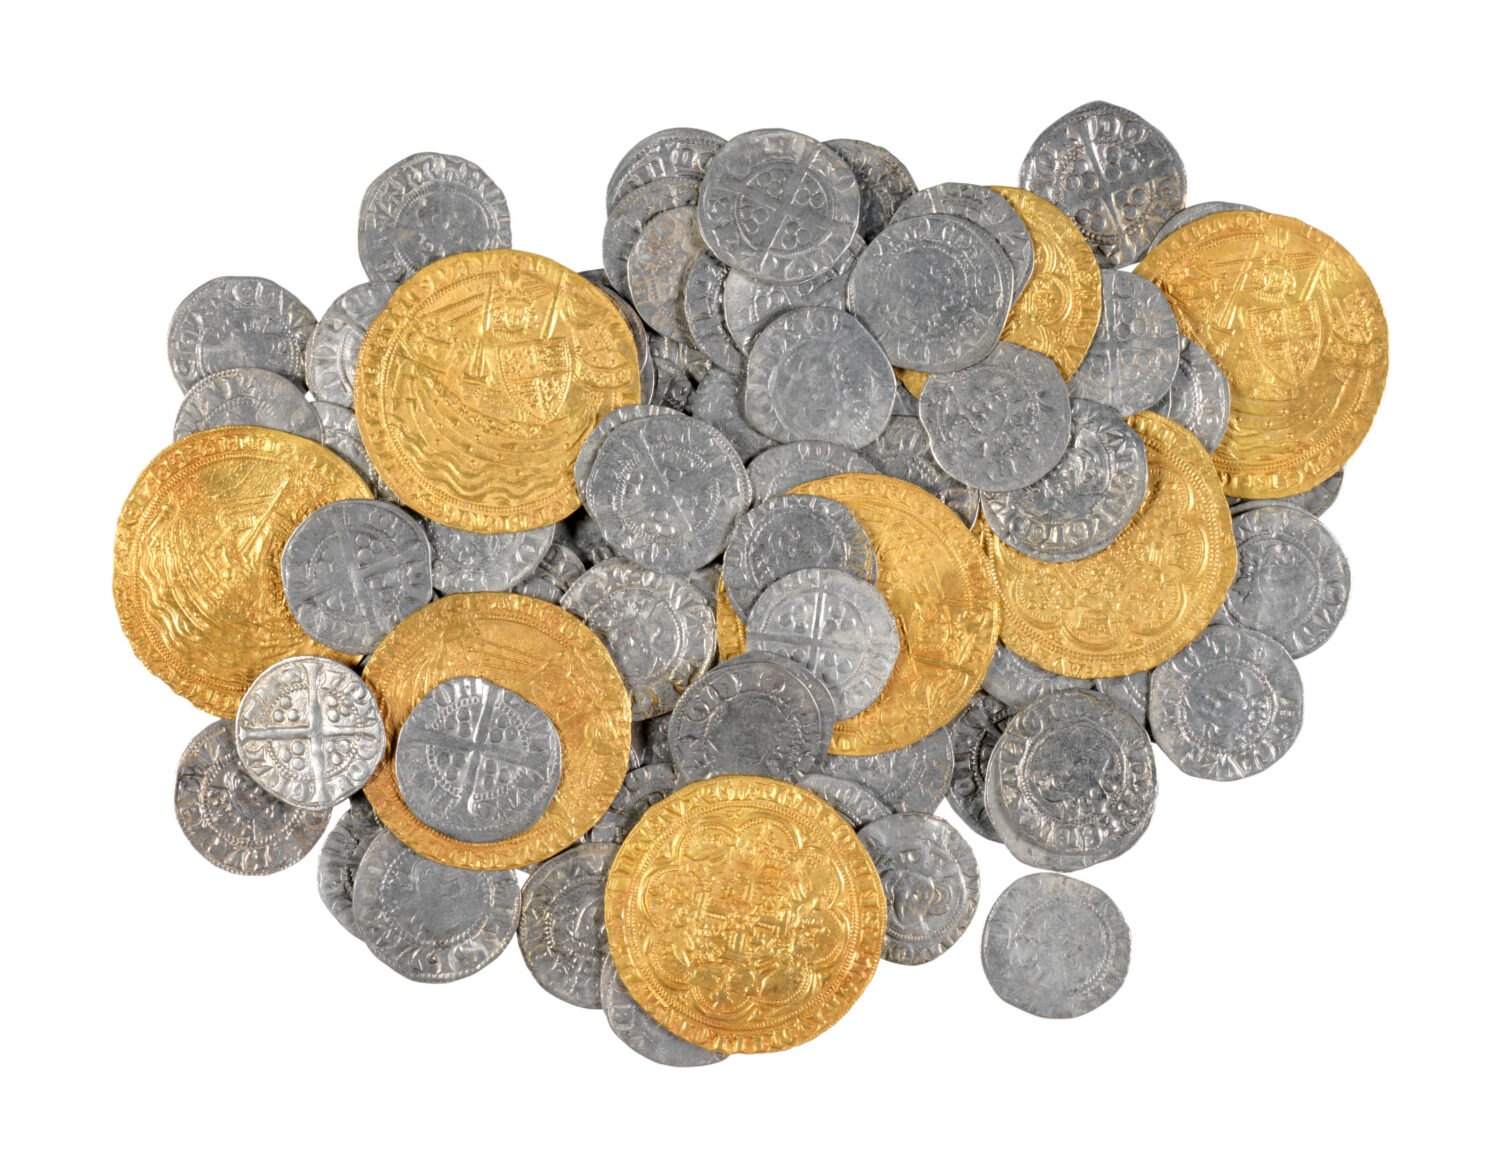 A photograph of the Cambridge hoard: a pile of many silver pennies and nine larger gold coins.